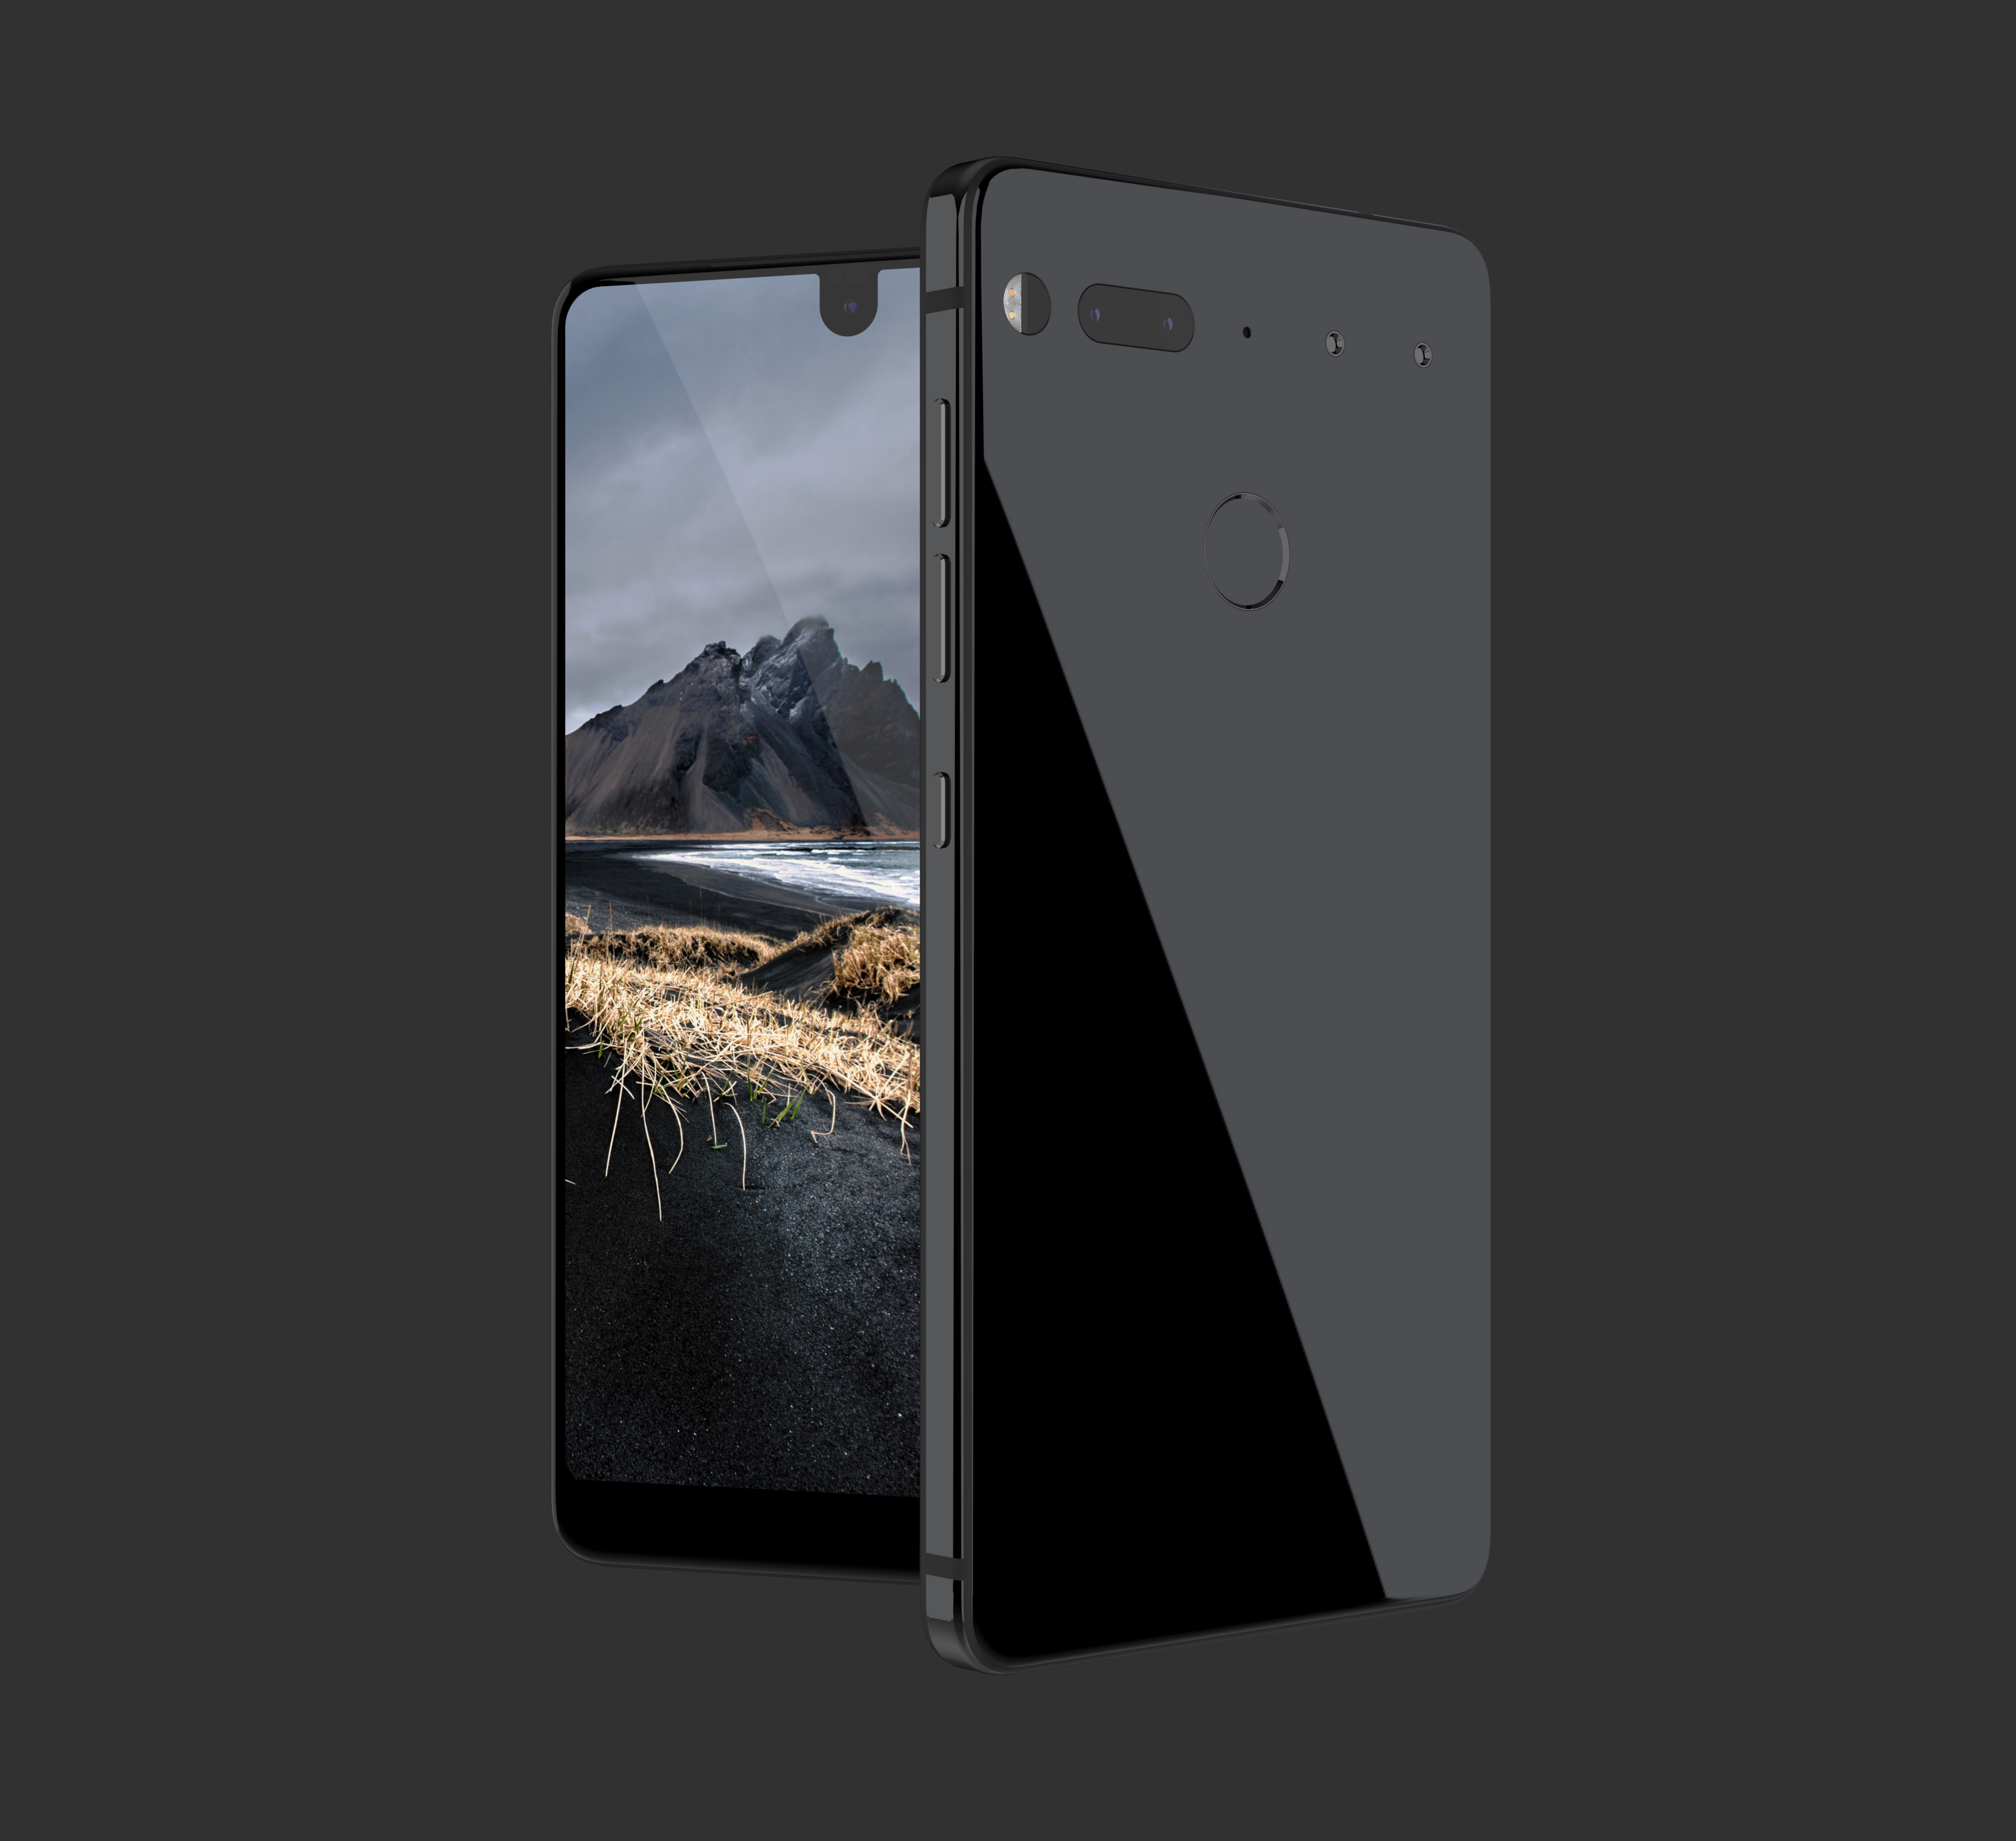 Andy Rubin's Essential PH-1 receives FCC certification. US release coming soon